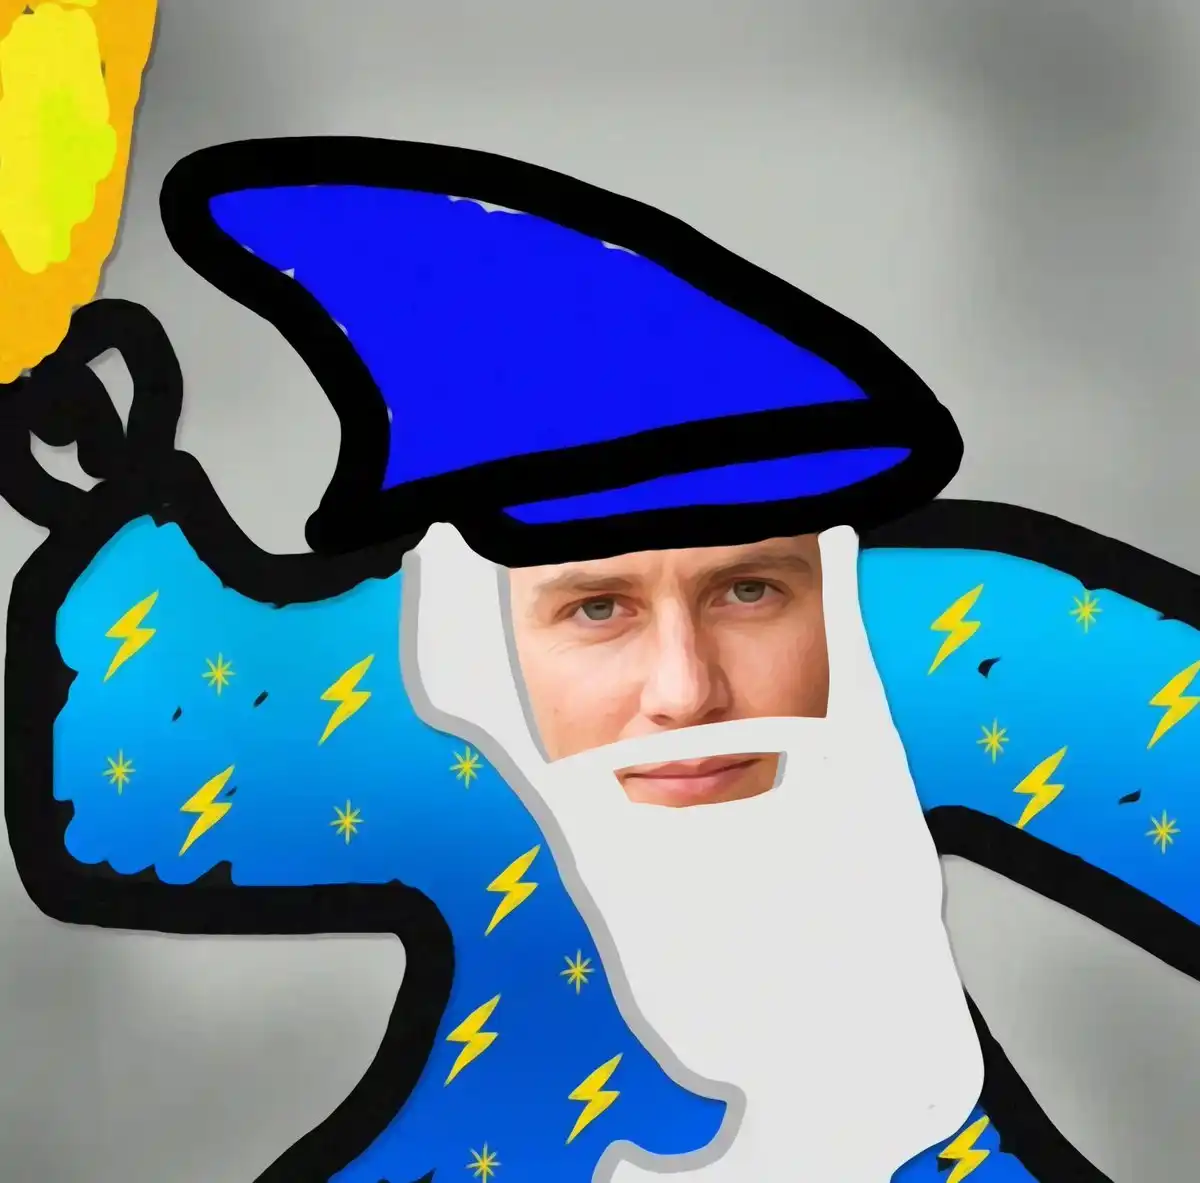 Bitcoin OG joins Taproot Wizards, why is Wizard Culture so popular?